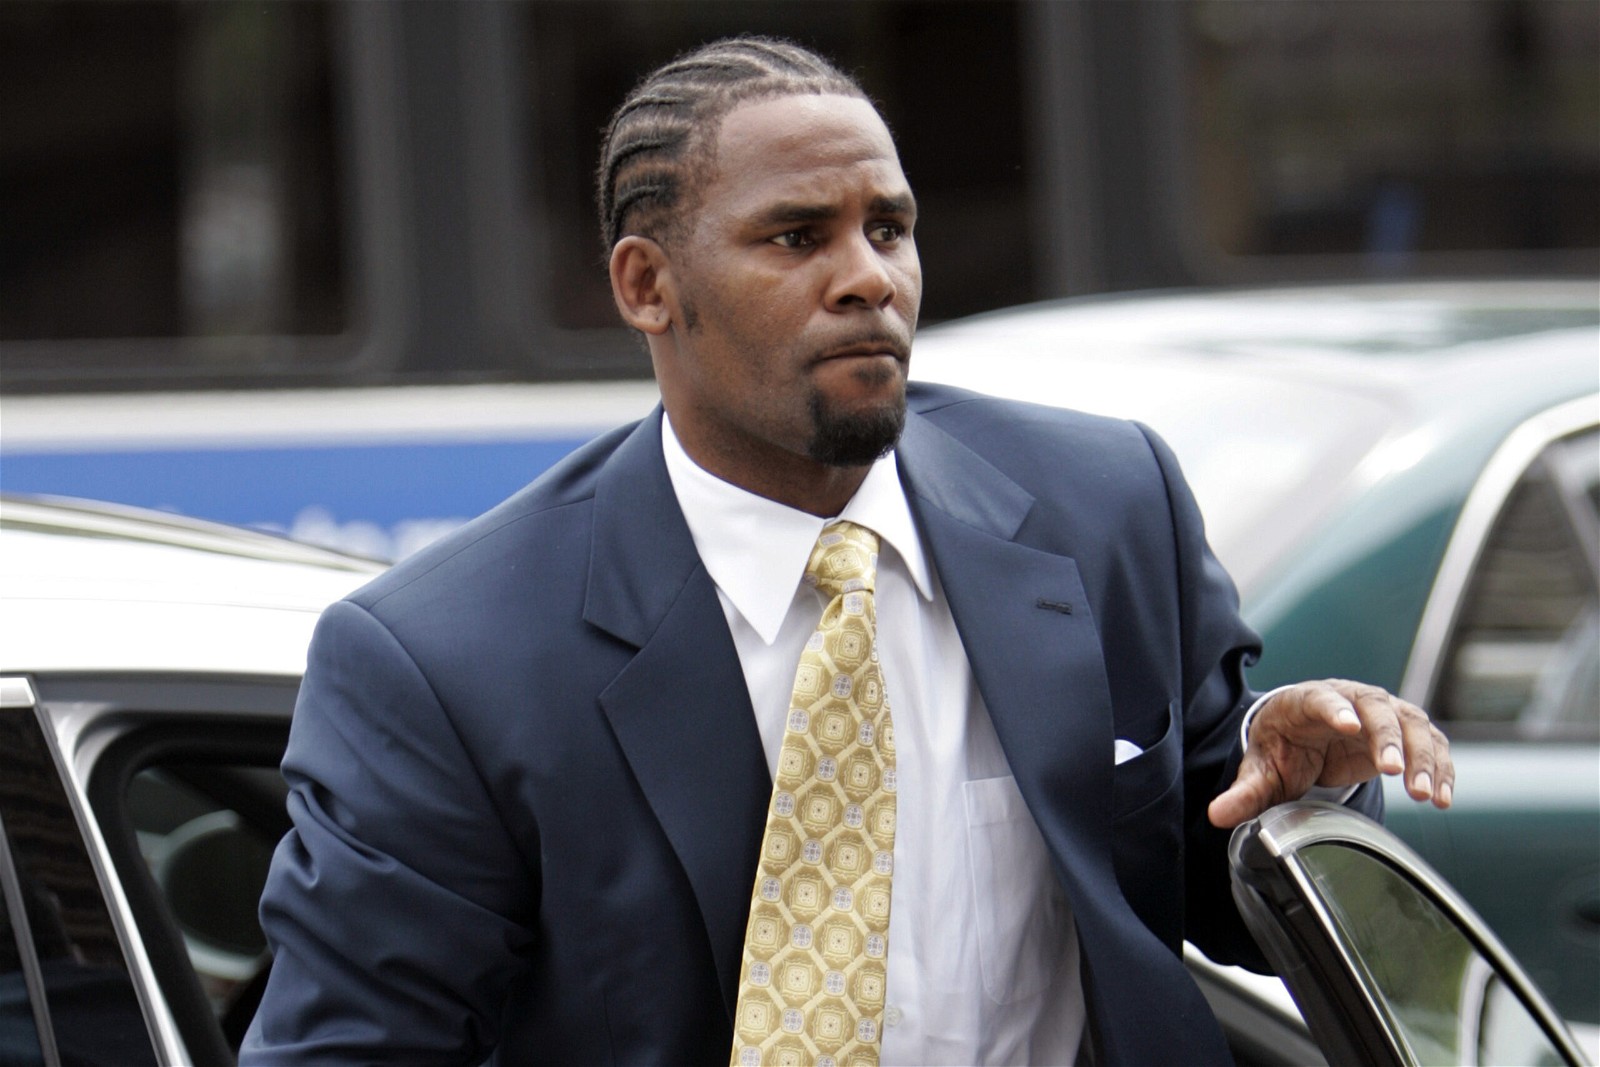 R. Kelly arrives at the Cook County Criminal Court Building, in Chicago